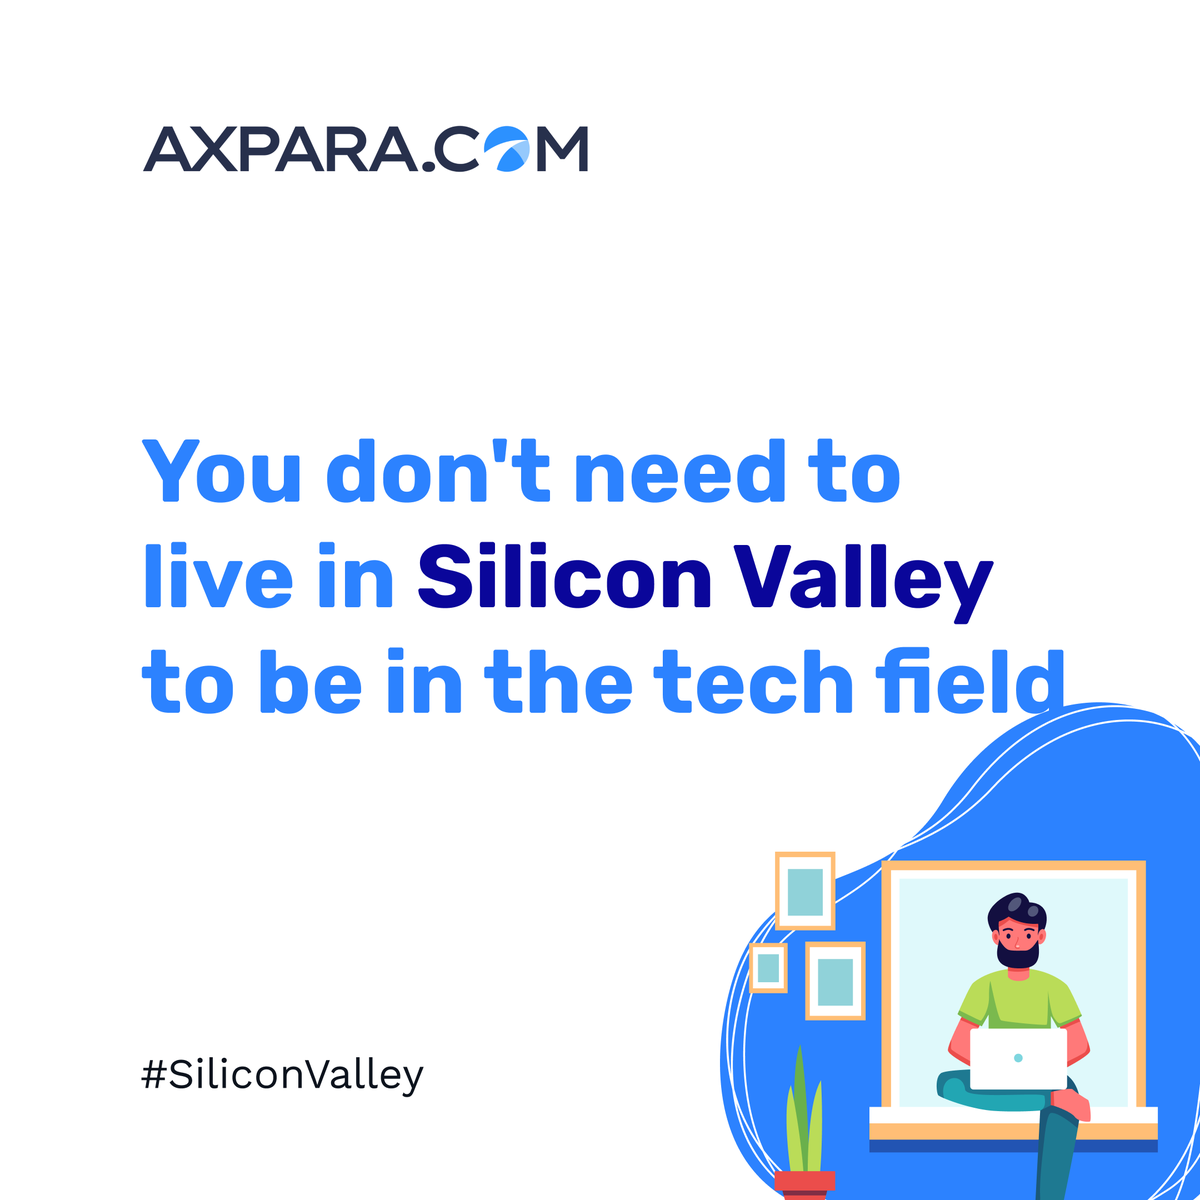 Don't let geography limit your career options! We're here to help you find tech opportunities no matter where you're located! 🗺️💼 #TechJobs #JobSearchAssistance